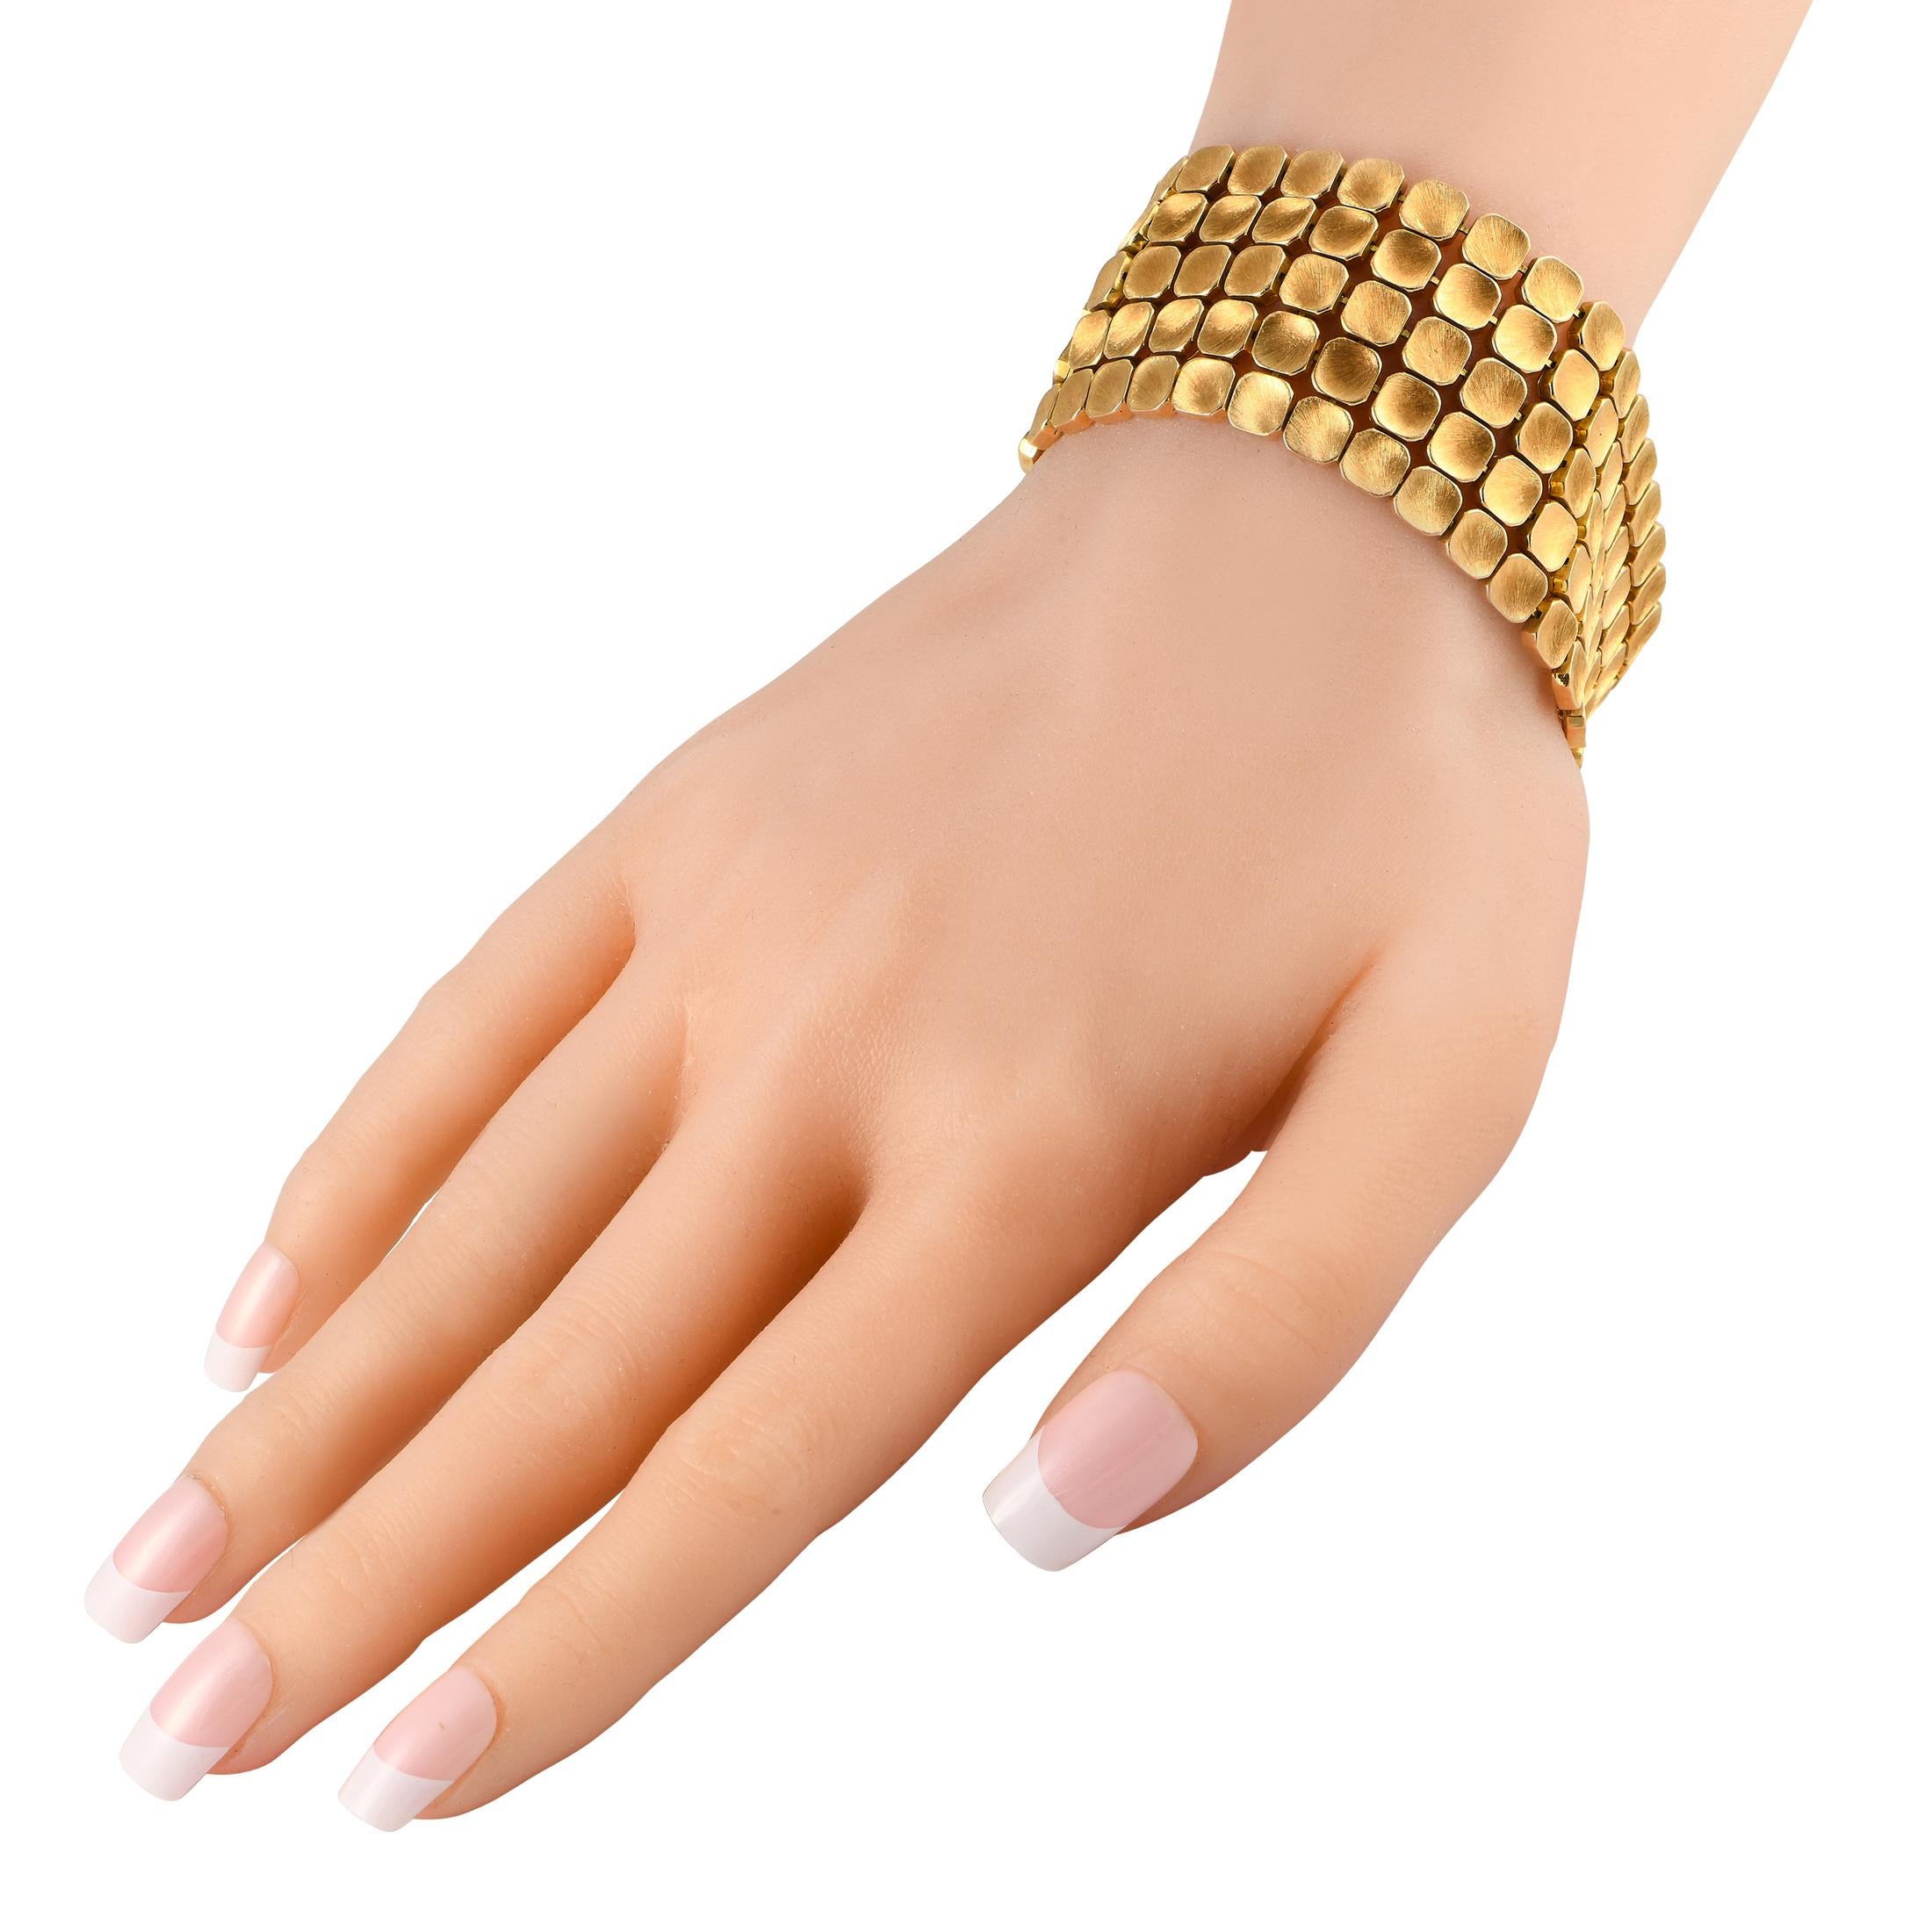 Switch things up and instantly add visual interest to your outfit with this gorgeous piece of textured jewelry. This 18K yellow gold bracelet is a lovely creation of famed Italian goldsmith Mario Buccellati. It features tiny octagonal tiles in